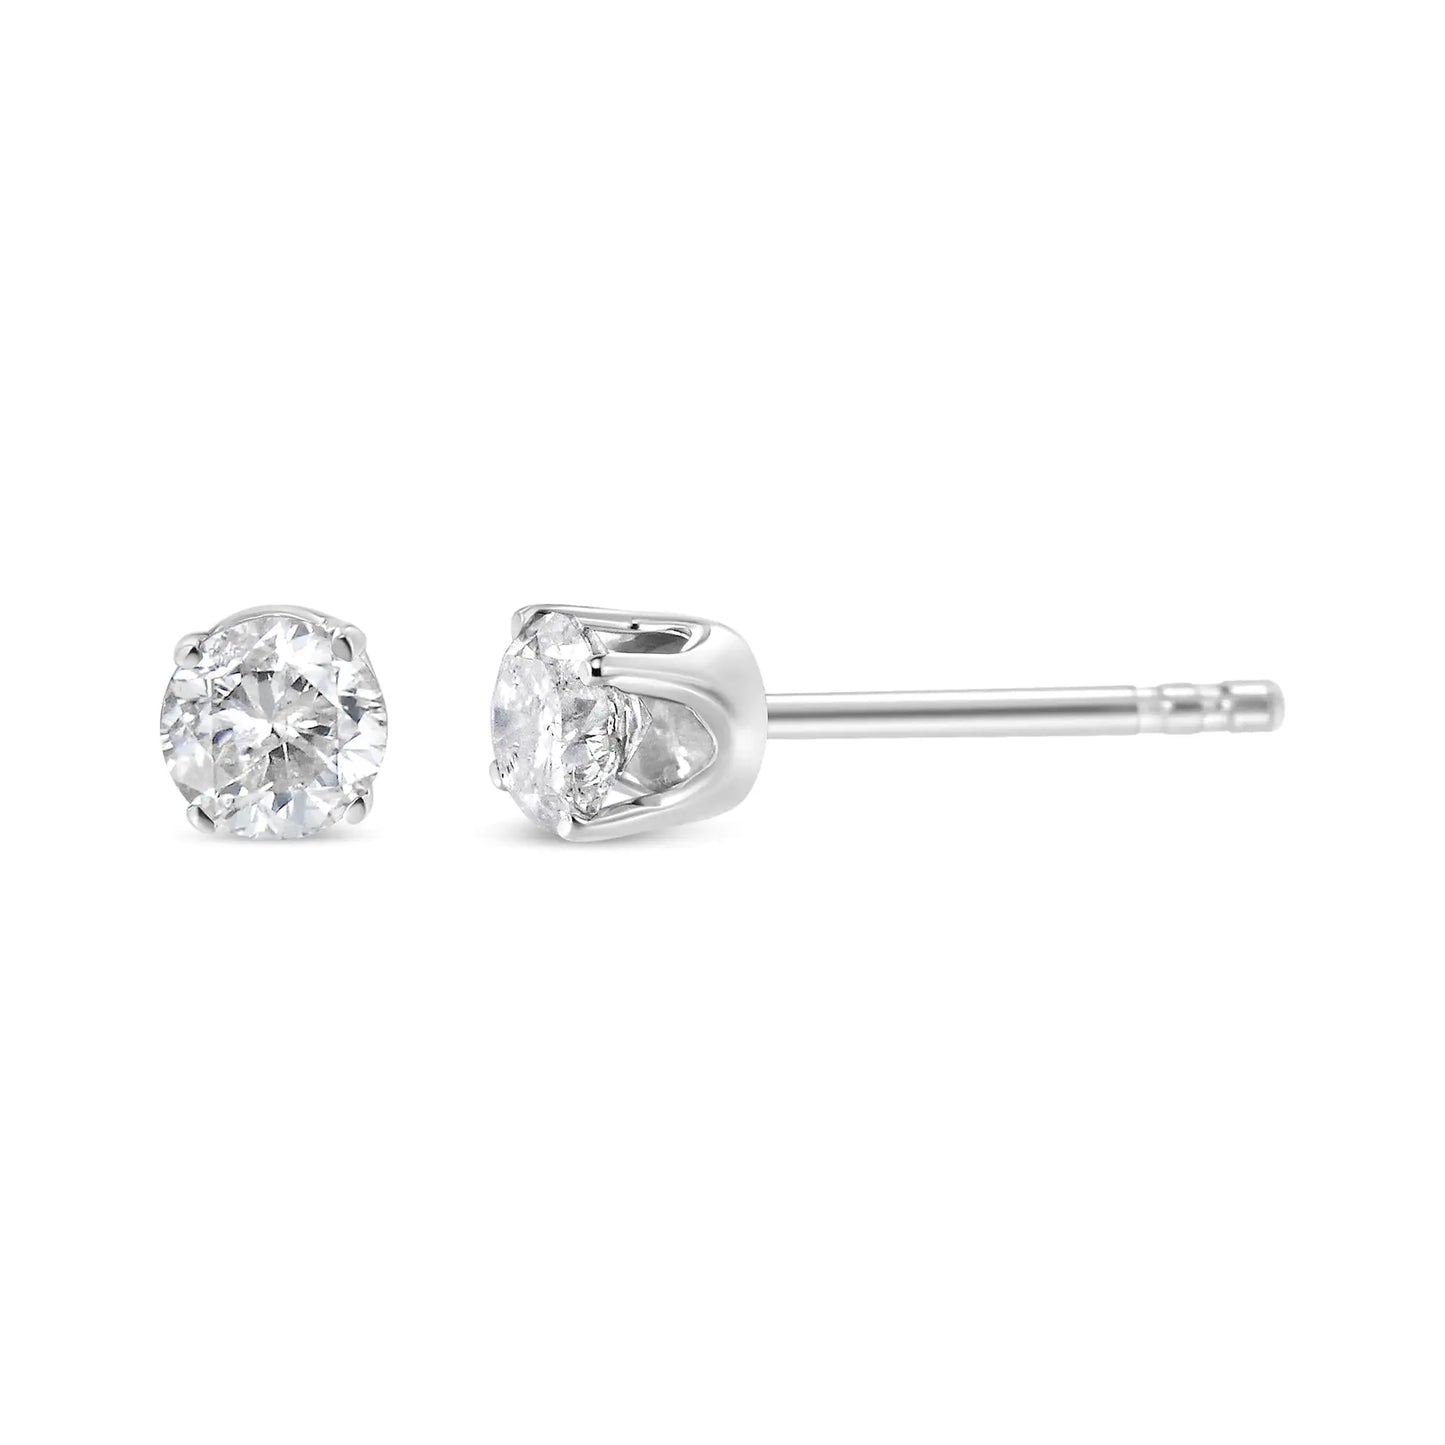 .925 Sterling Silver 3/8 Cttw Round Brilliant-Cut Diamond Classic 4-Prong Stud Earrings (I-J Color, I1-I2 Clarity)